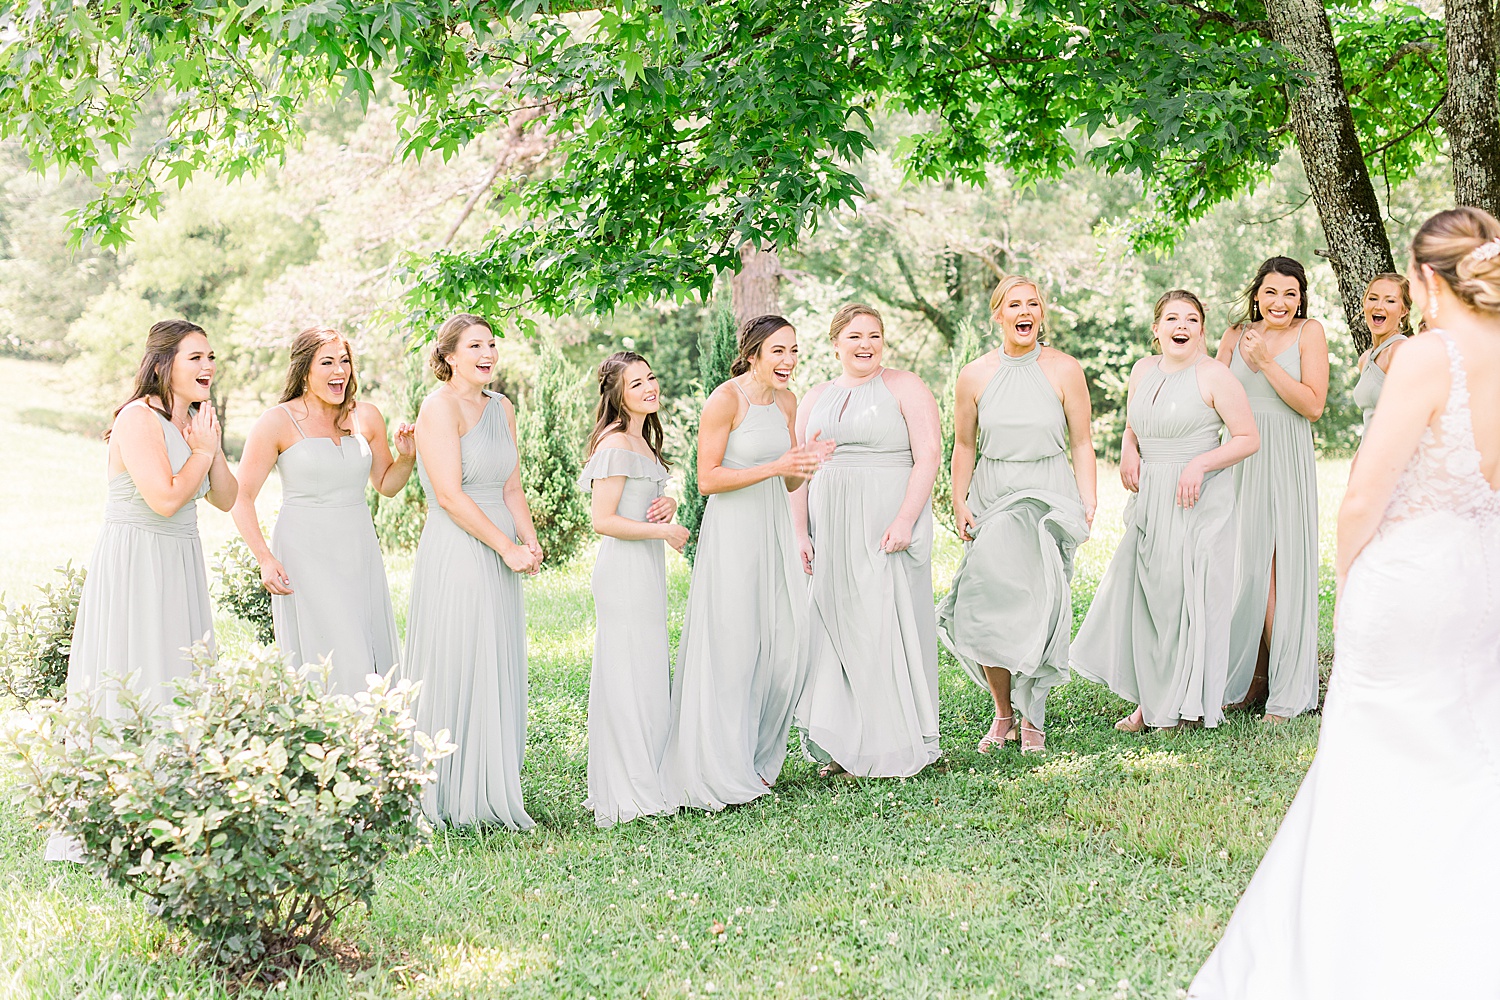 Bridesmaids reactions to Seeing Bride for first time in wedding dress